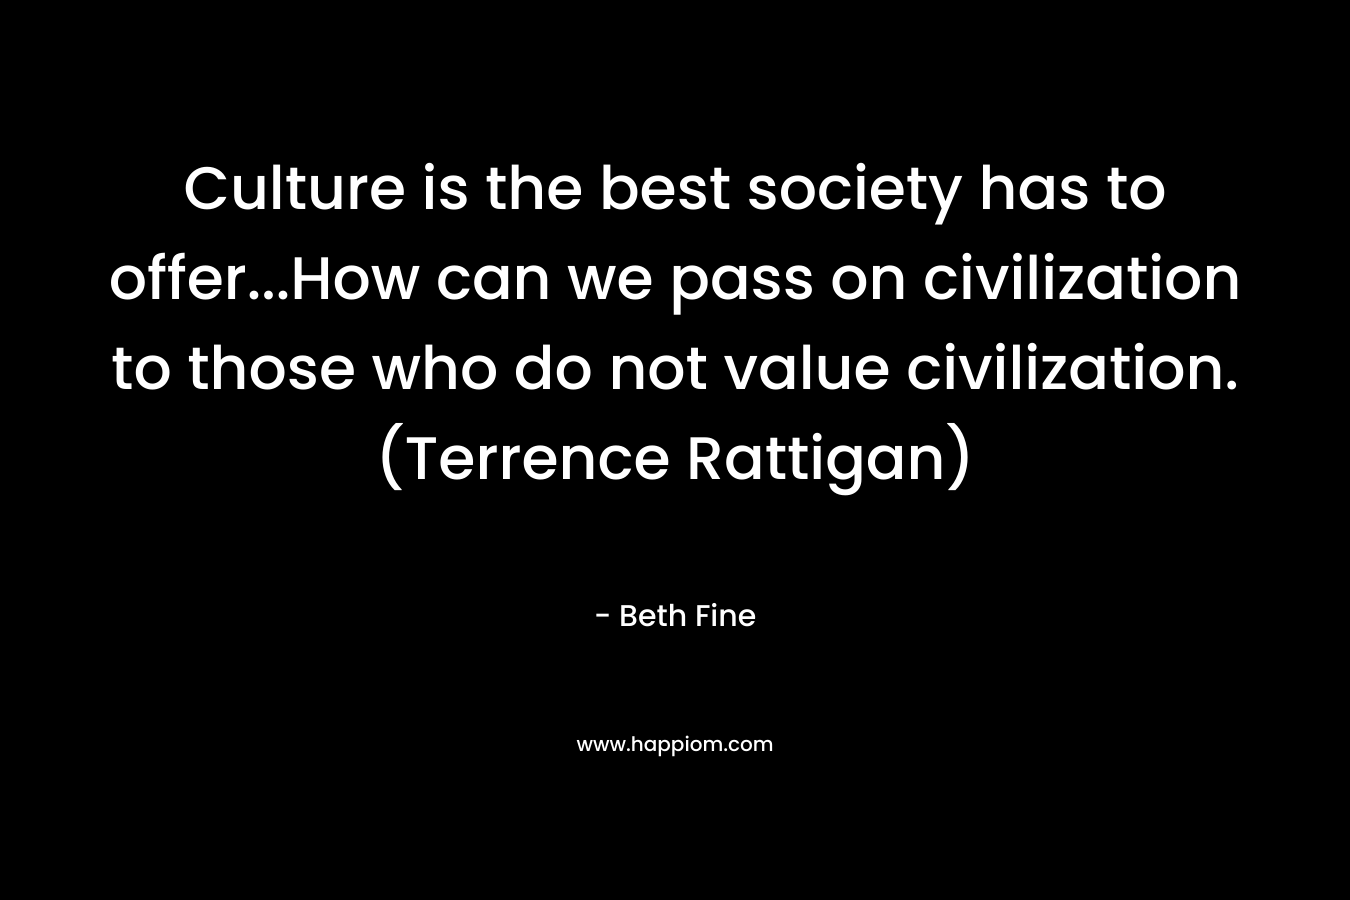 Culture is the best society has to offer...How can we pass on civilization to those who do not value civilization. (Terrence Rattigan)